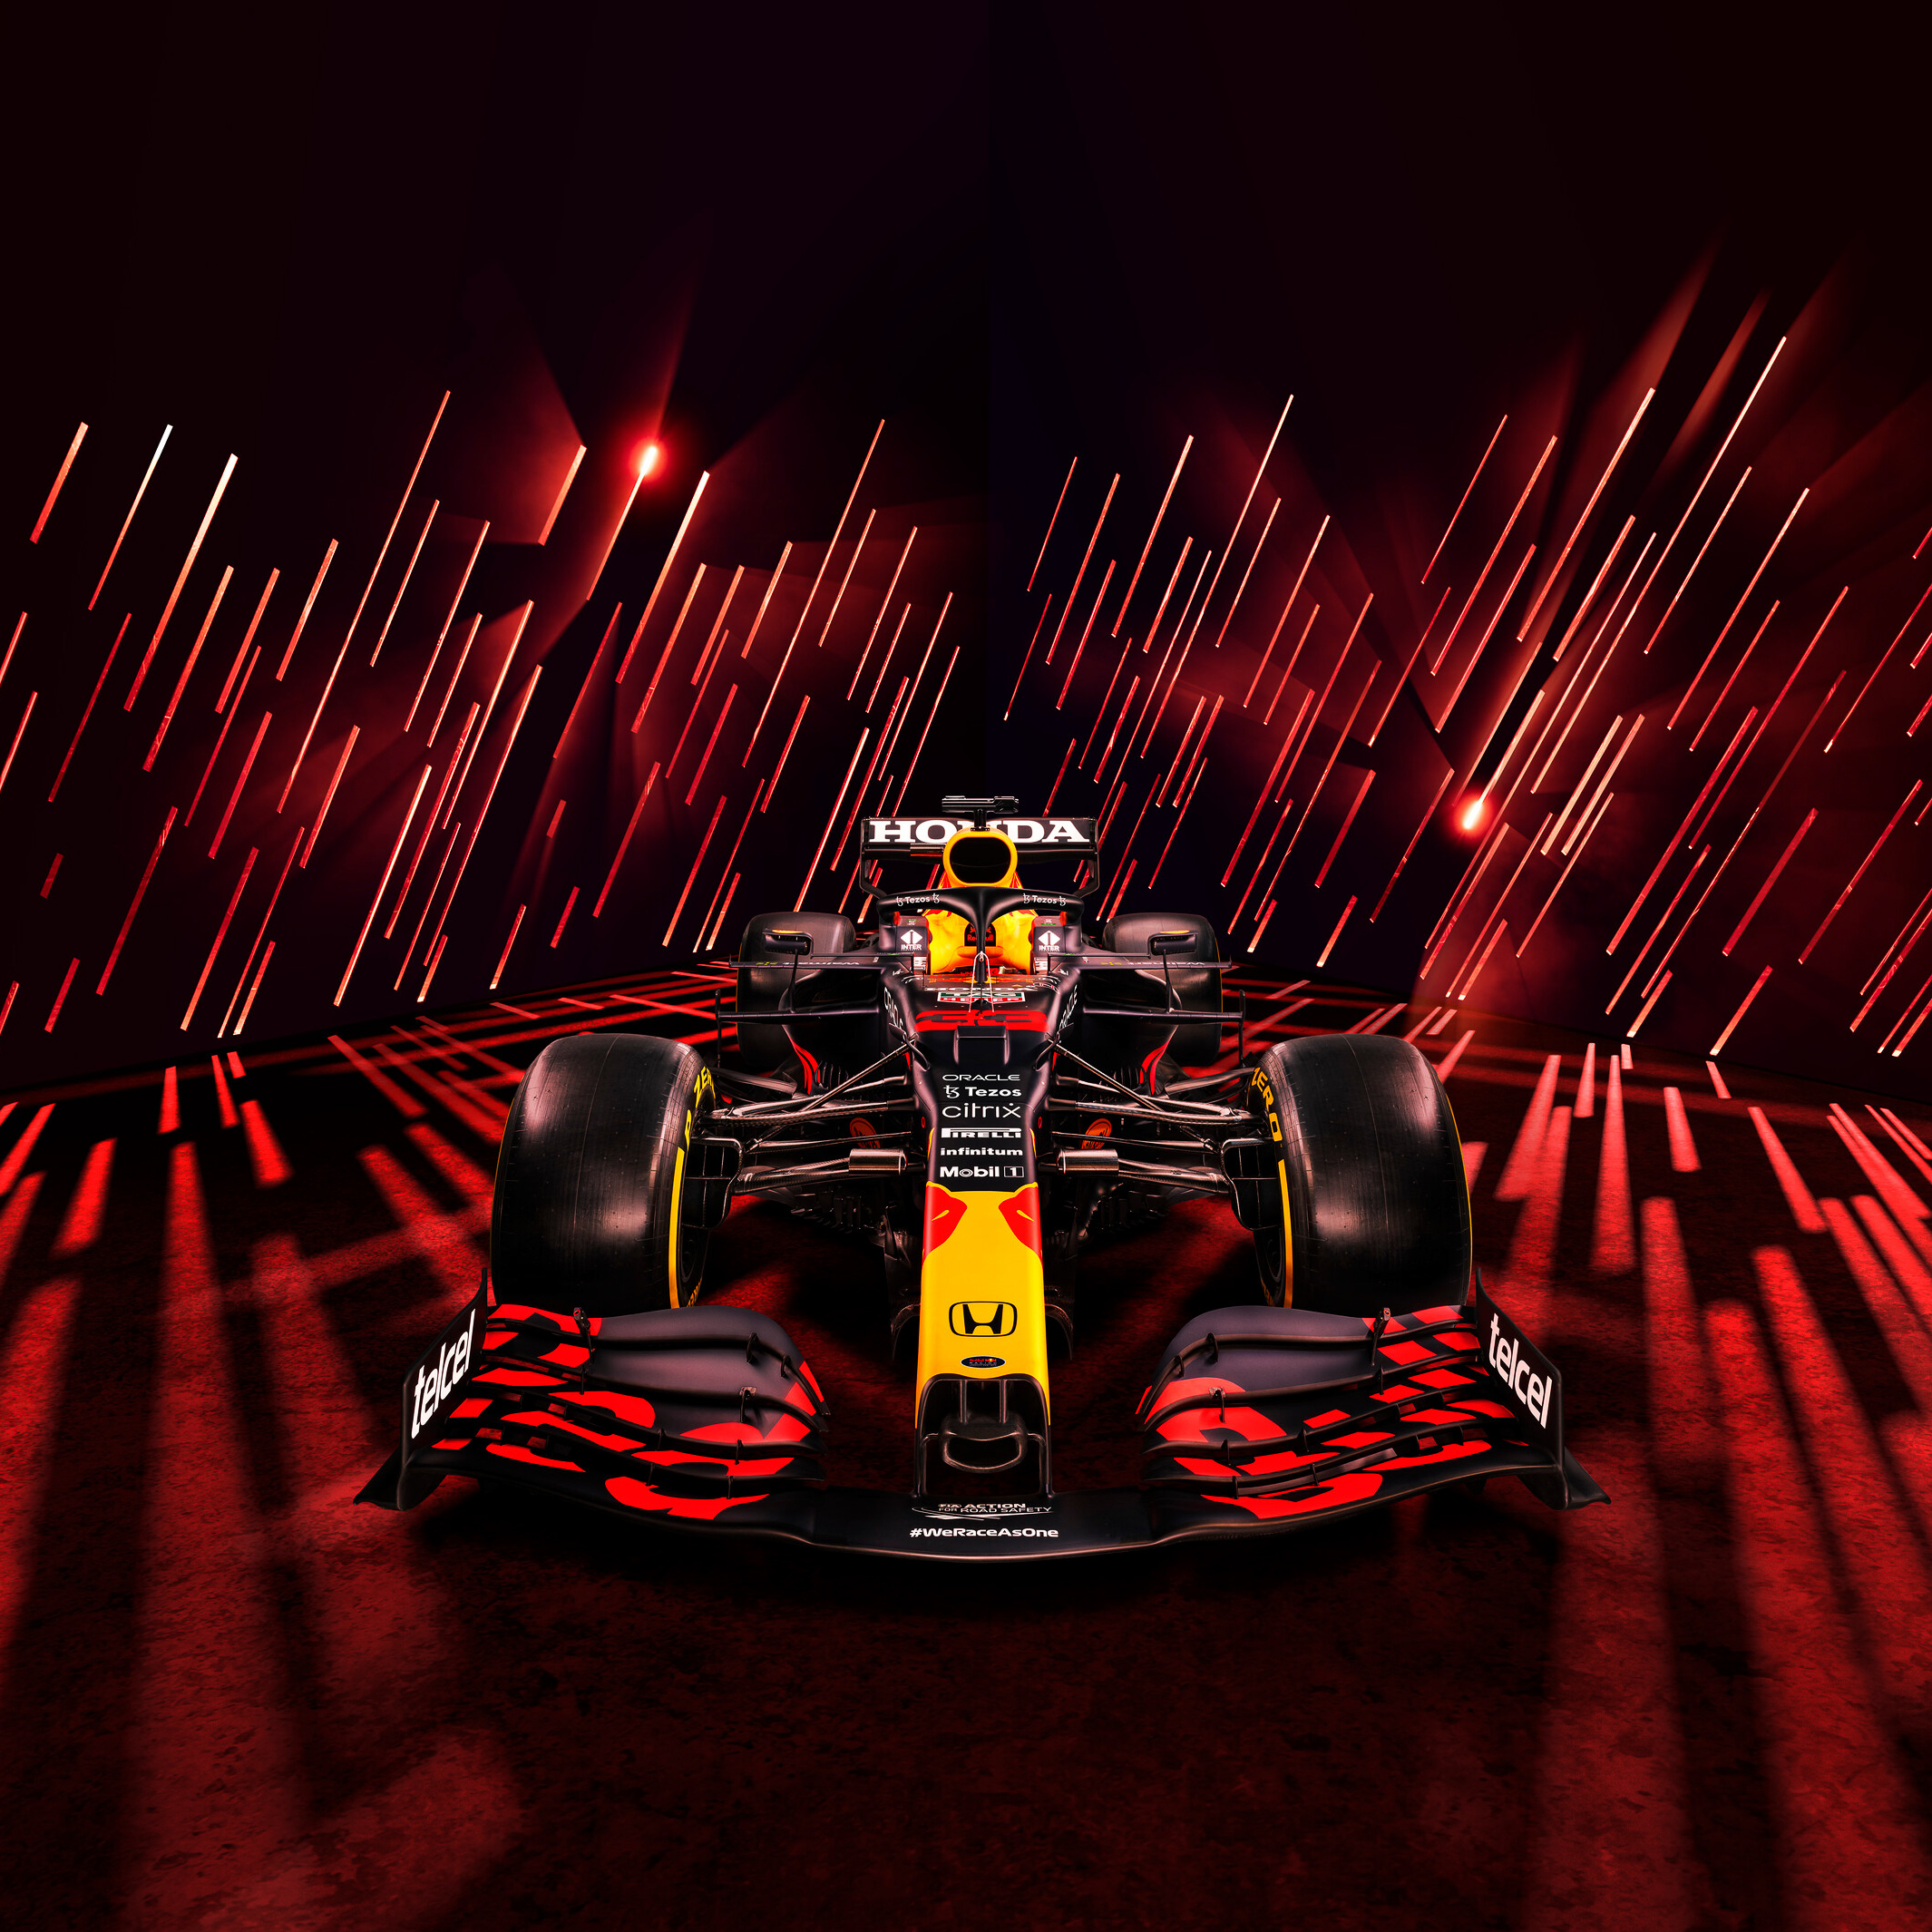 Oracle Red Bull Racing on Twitter: Our 2021 rocket ship